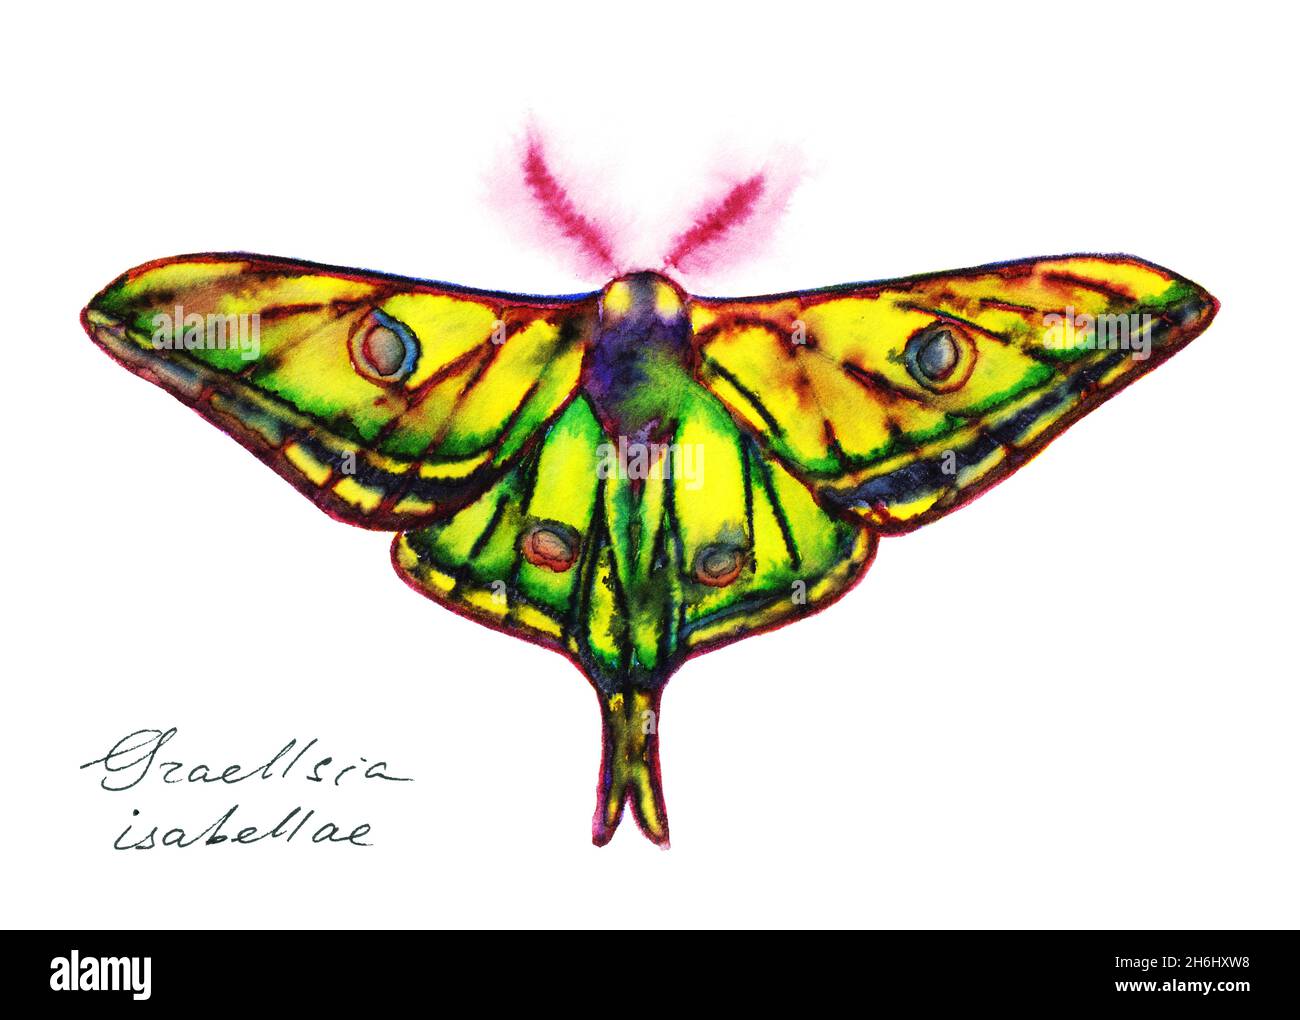 Graellsia isabellae, the Spanish moon moth in color ink on white background Stock Photo